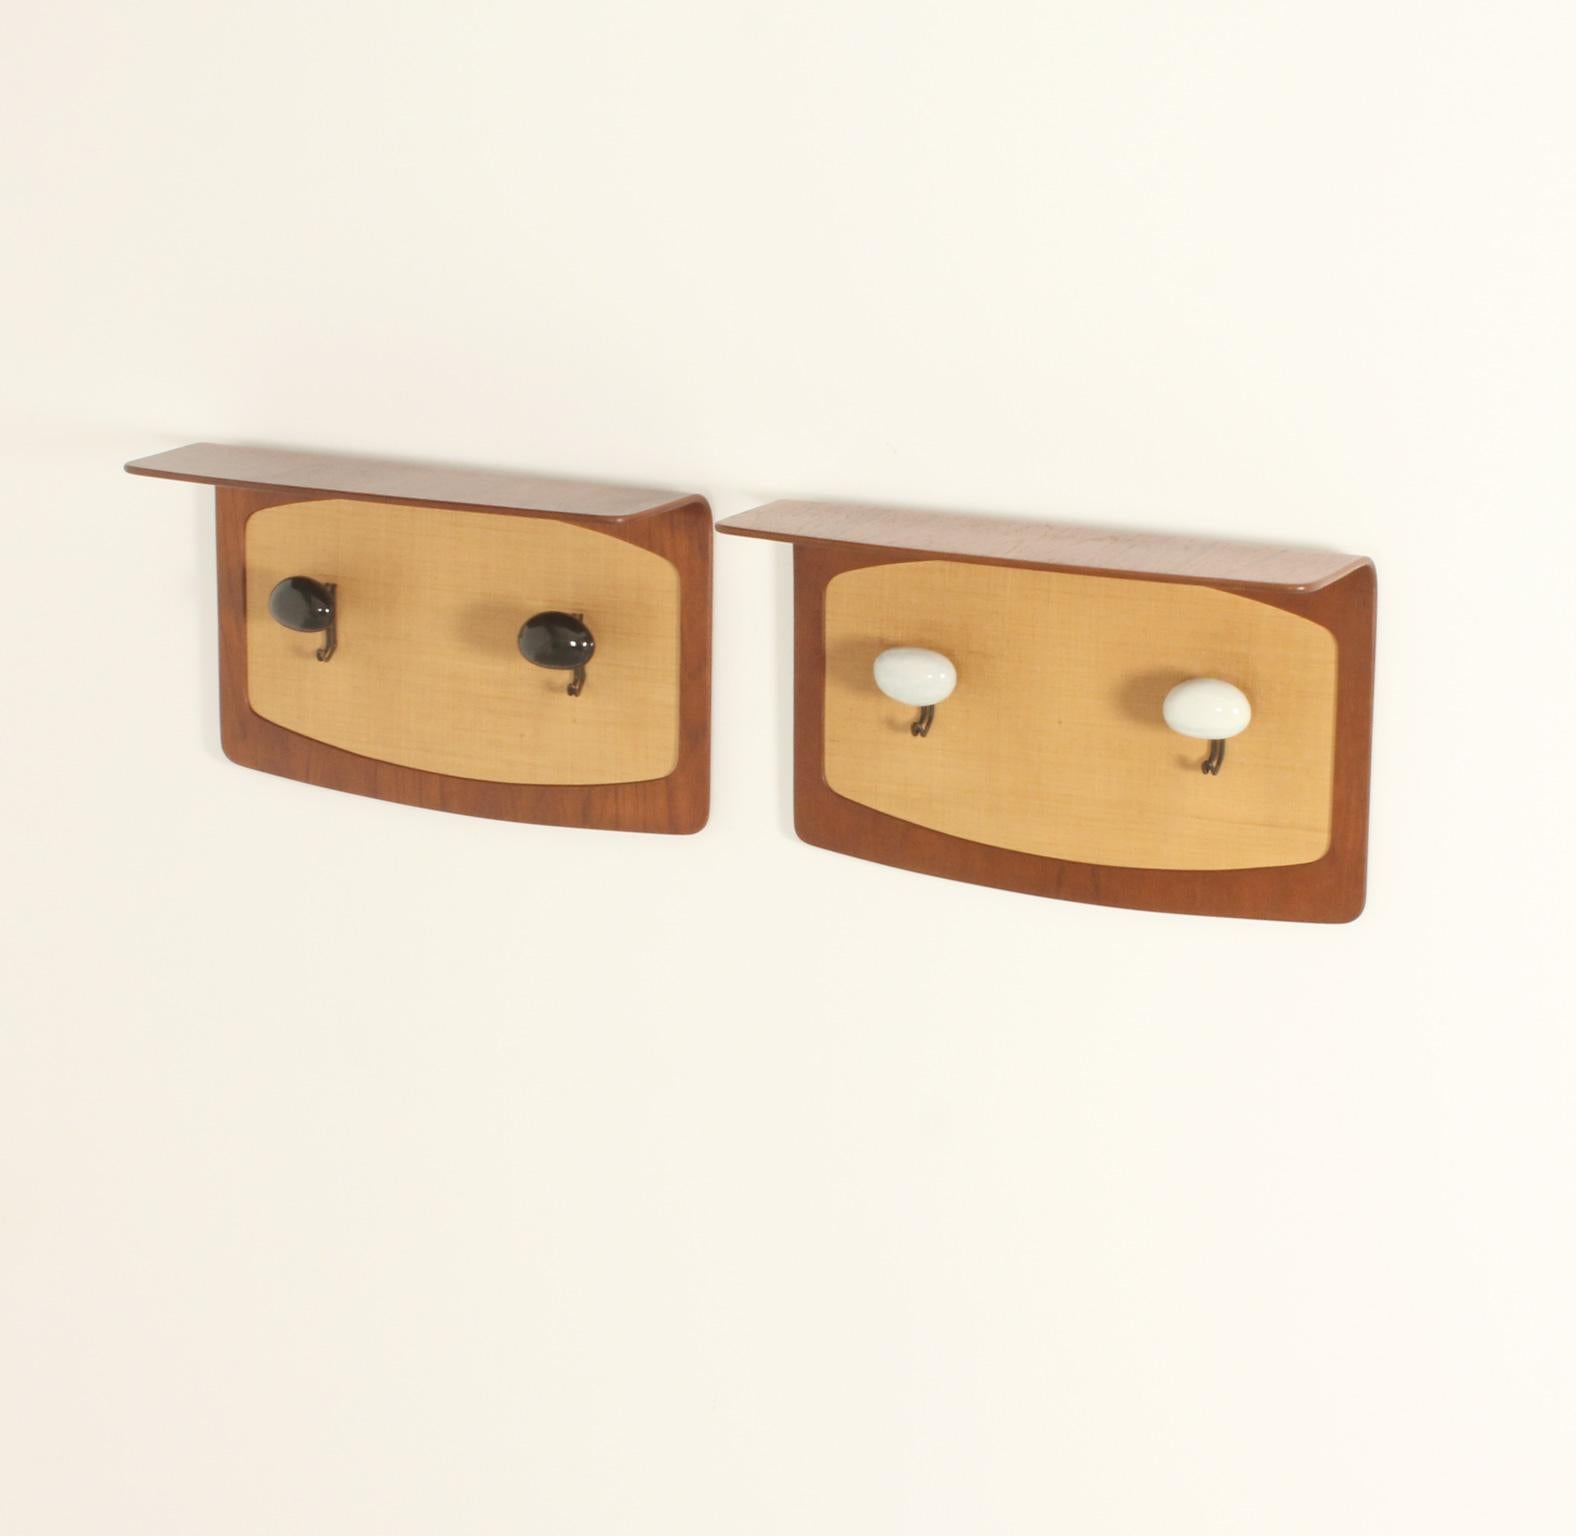 Pair of Coat Racks in Teak and Seagrass by Campo & Graffi for Home, 1950's  For Sale 1